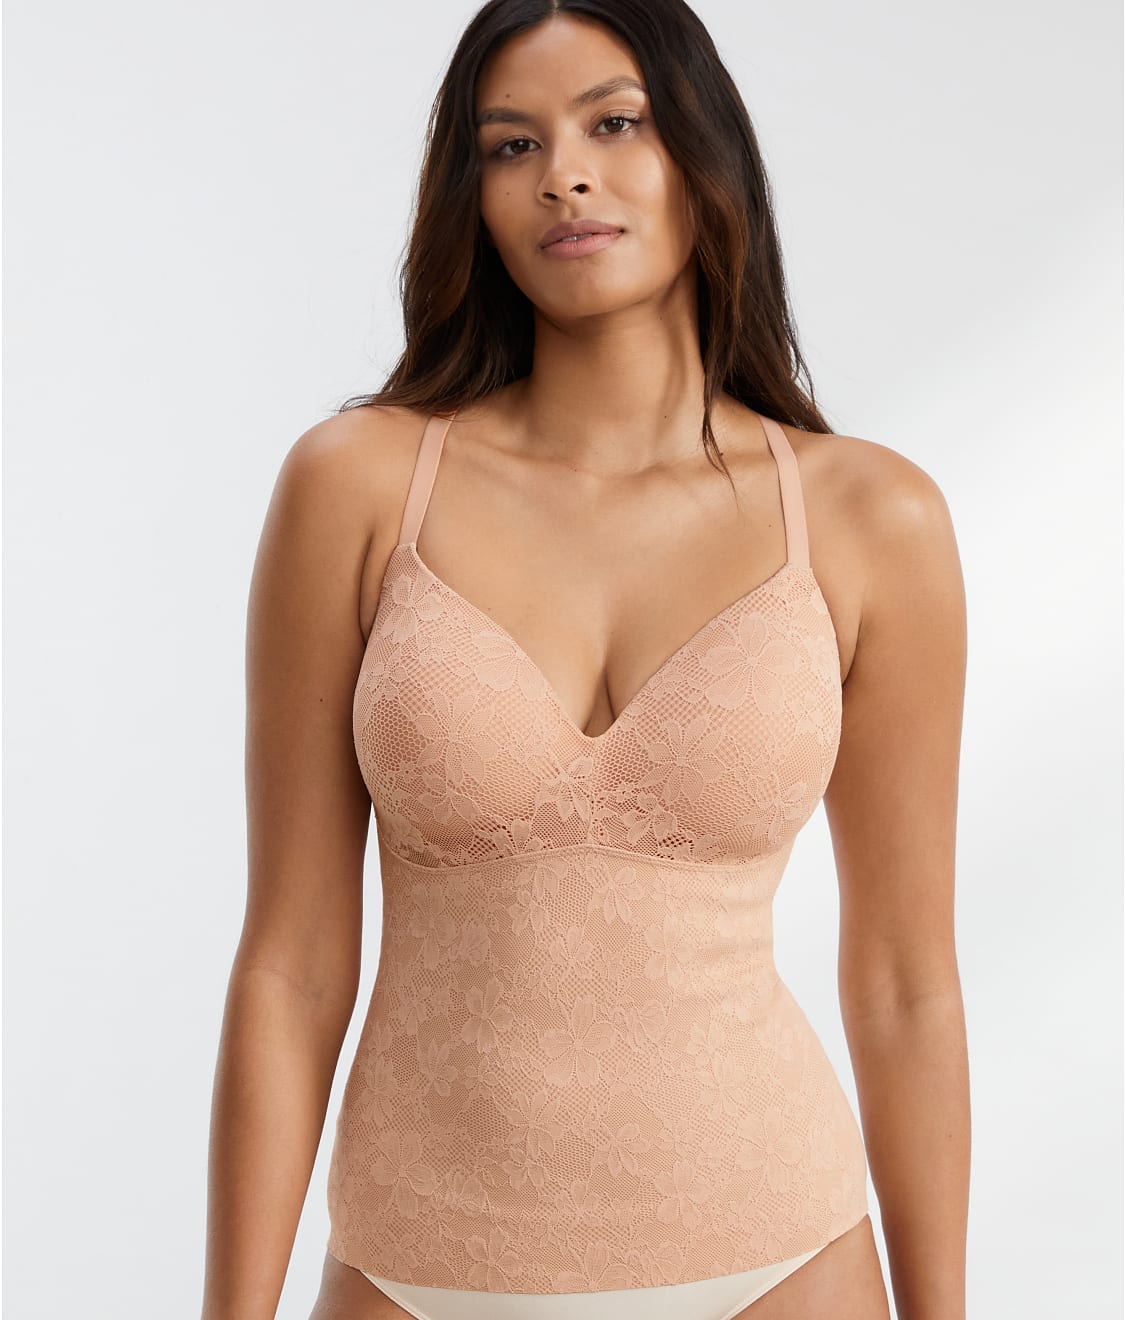 The Smoothing Lace Cami